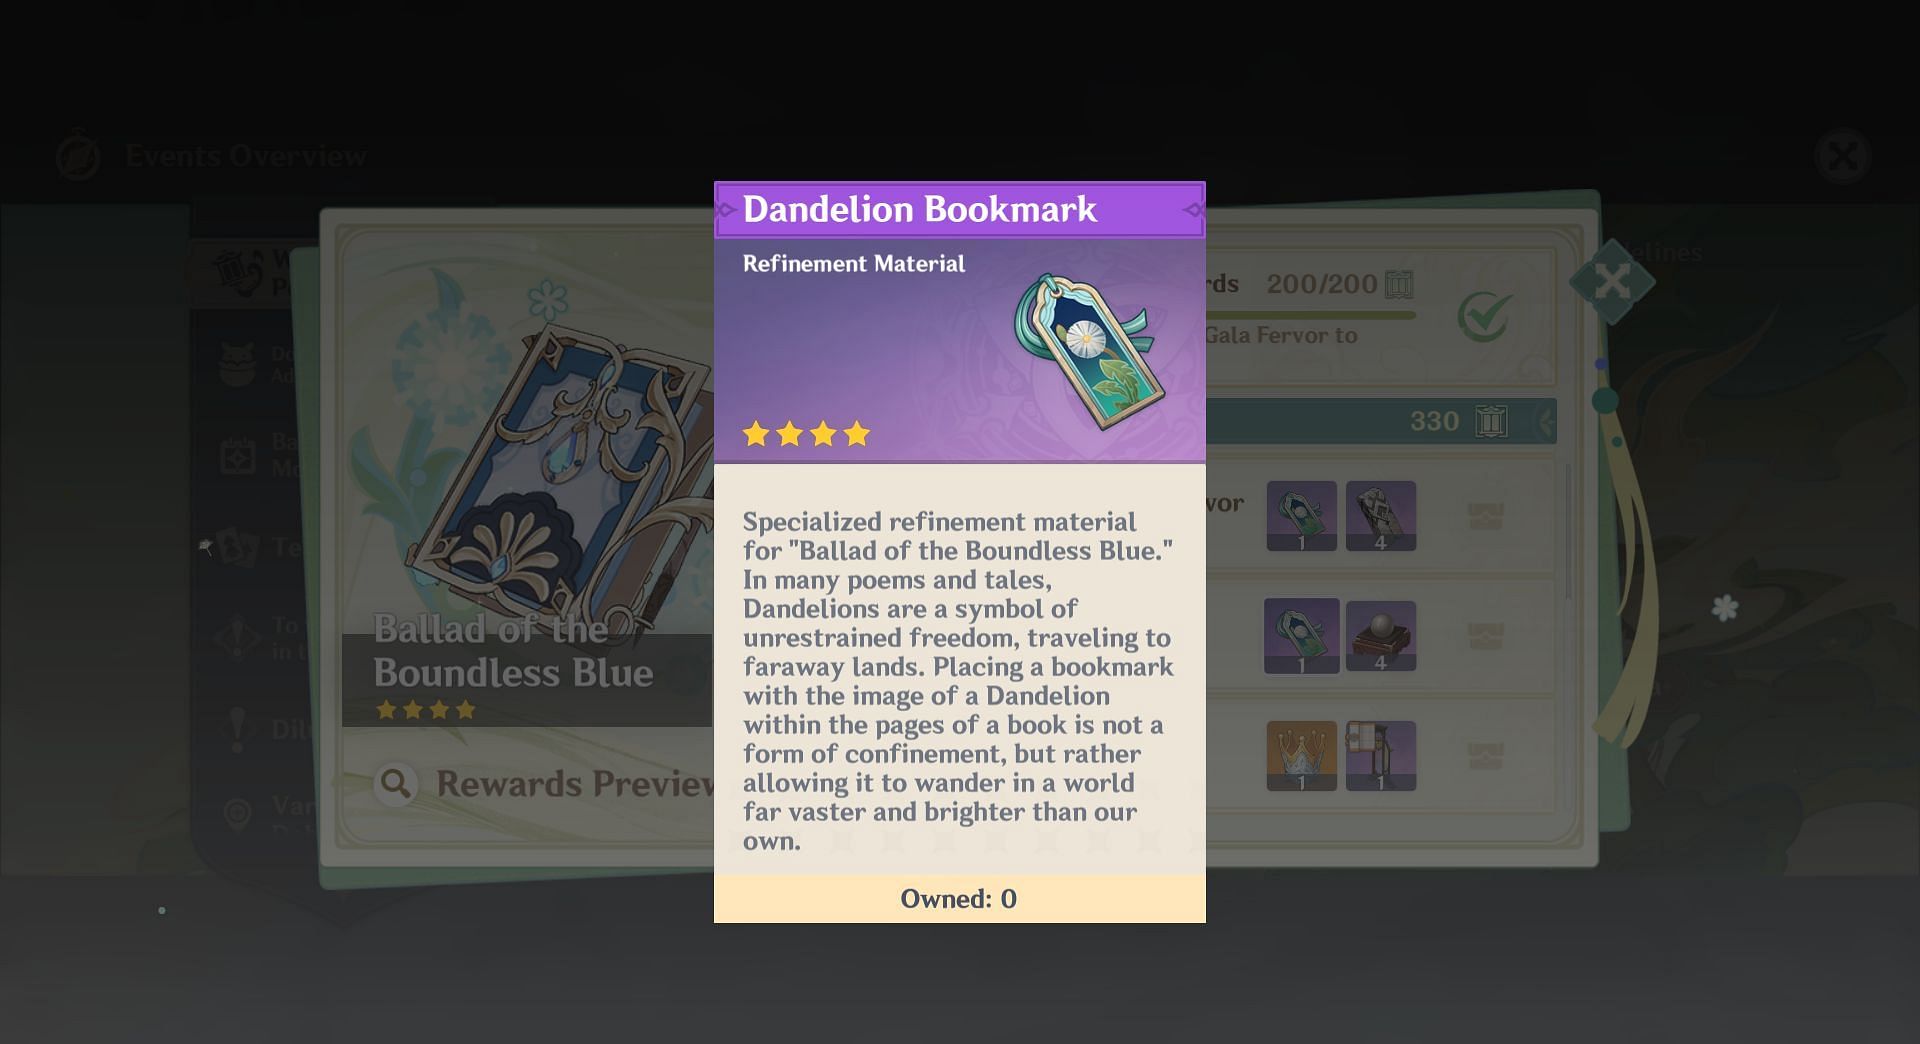 Collect Poetry Gala Fervor to obtain Dandelion Bookmarks to refine the weapon (Image via HoYoverse)